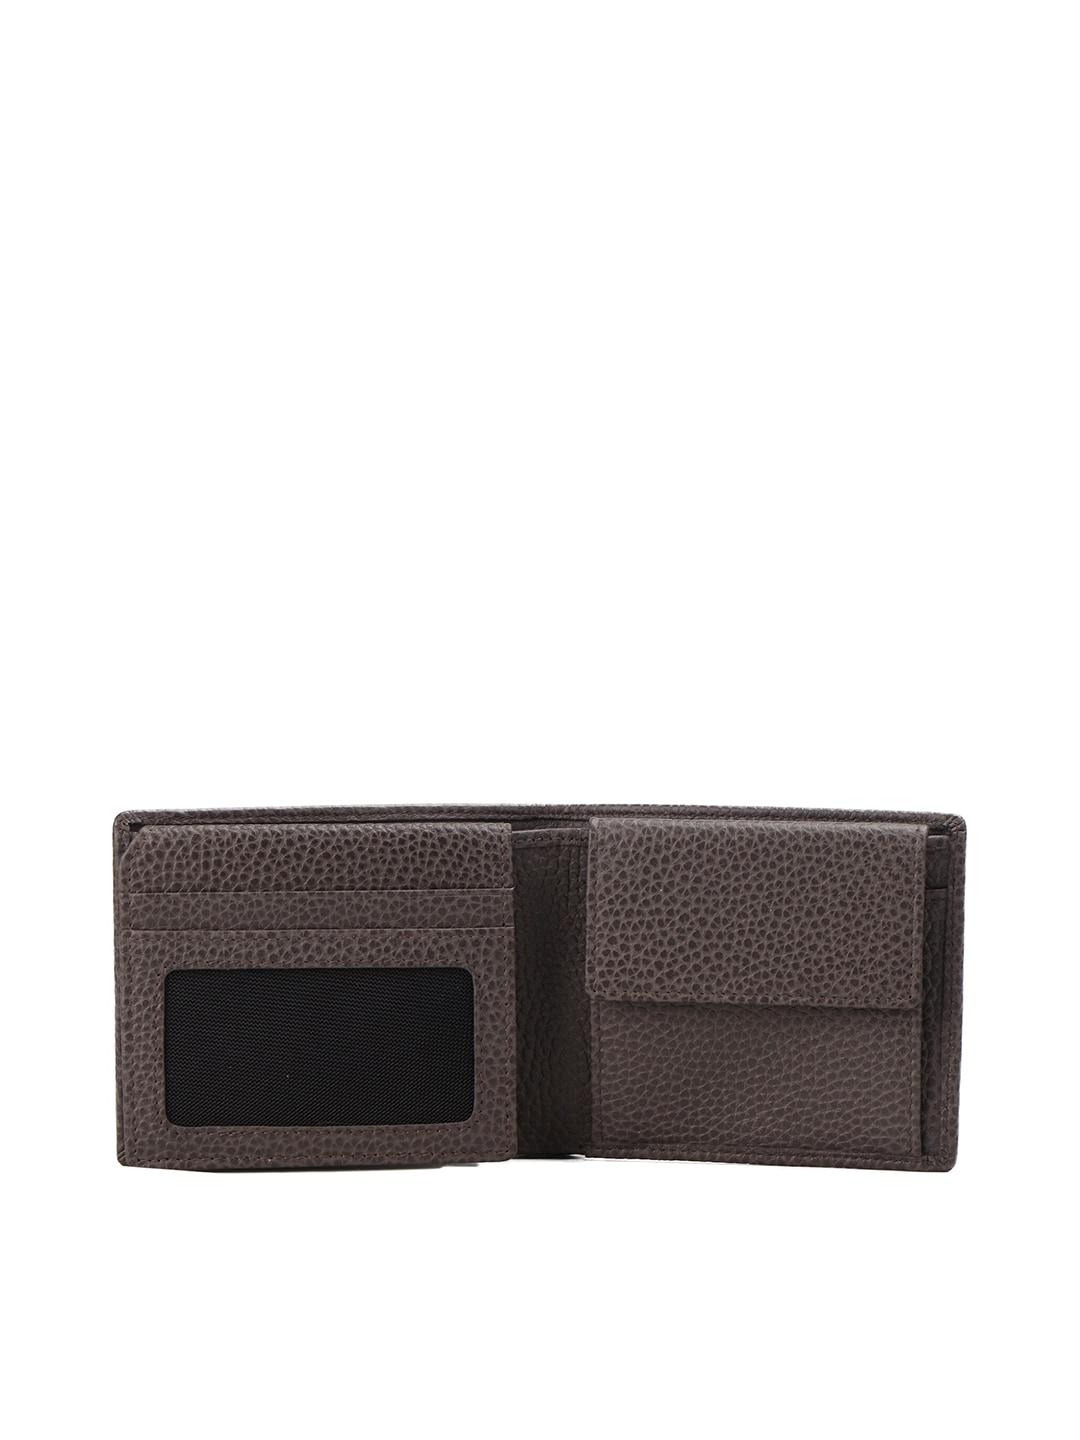 swiss military men grey & white leather two fold wallet